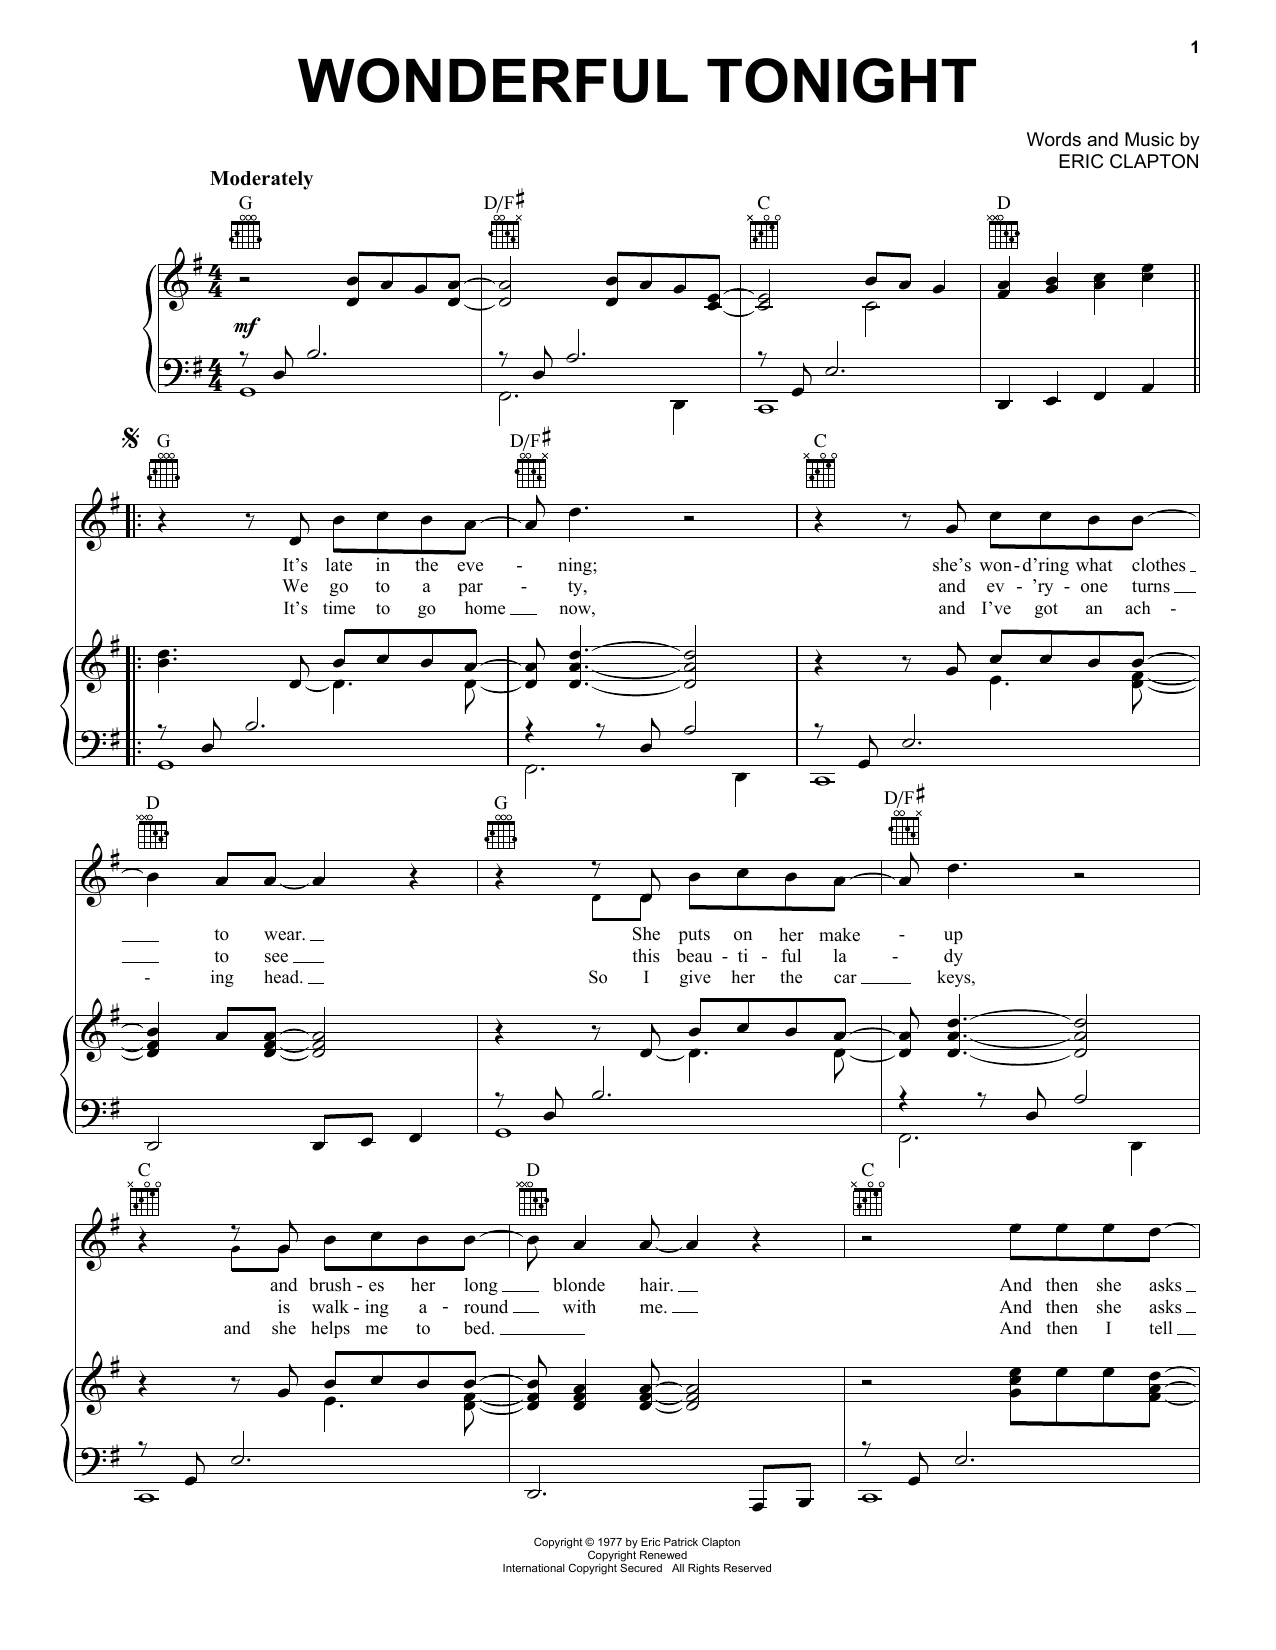 Eric Clapton Wonderful Tonight (from 'The Story Of Us') sheet music notes and chords. Download Printable PDF.